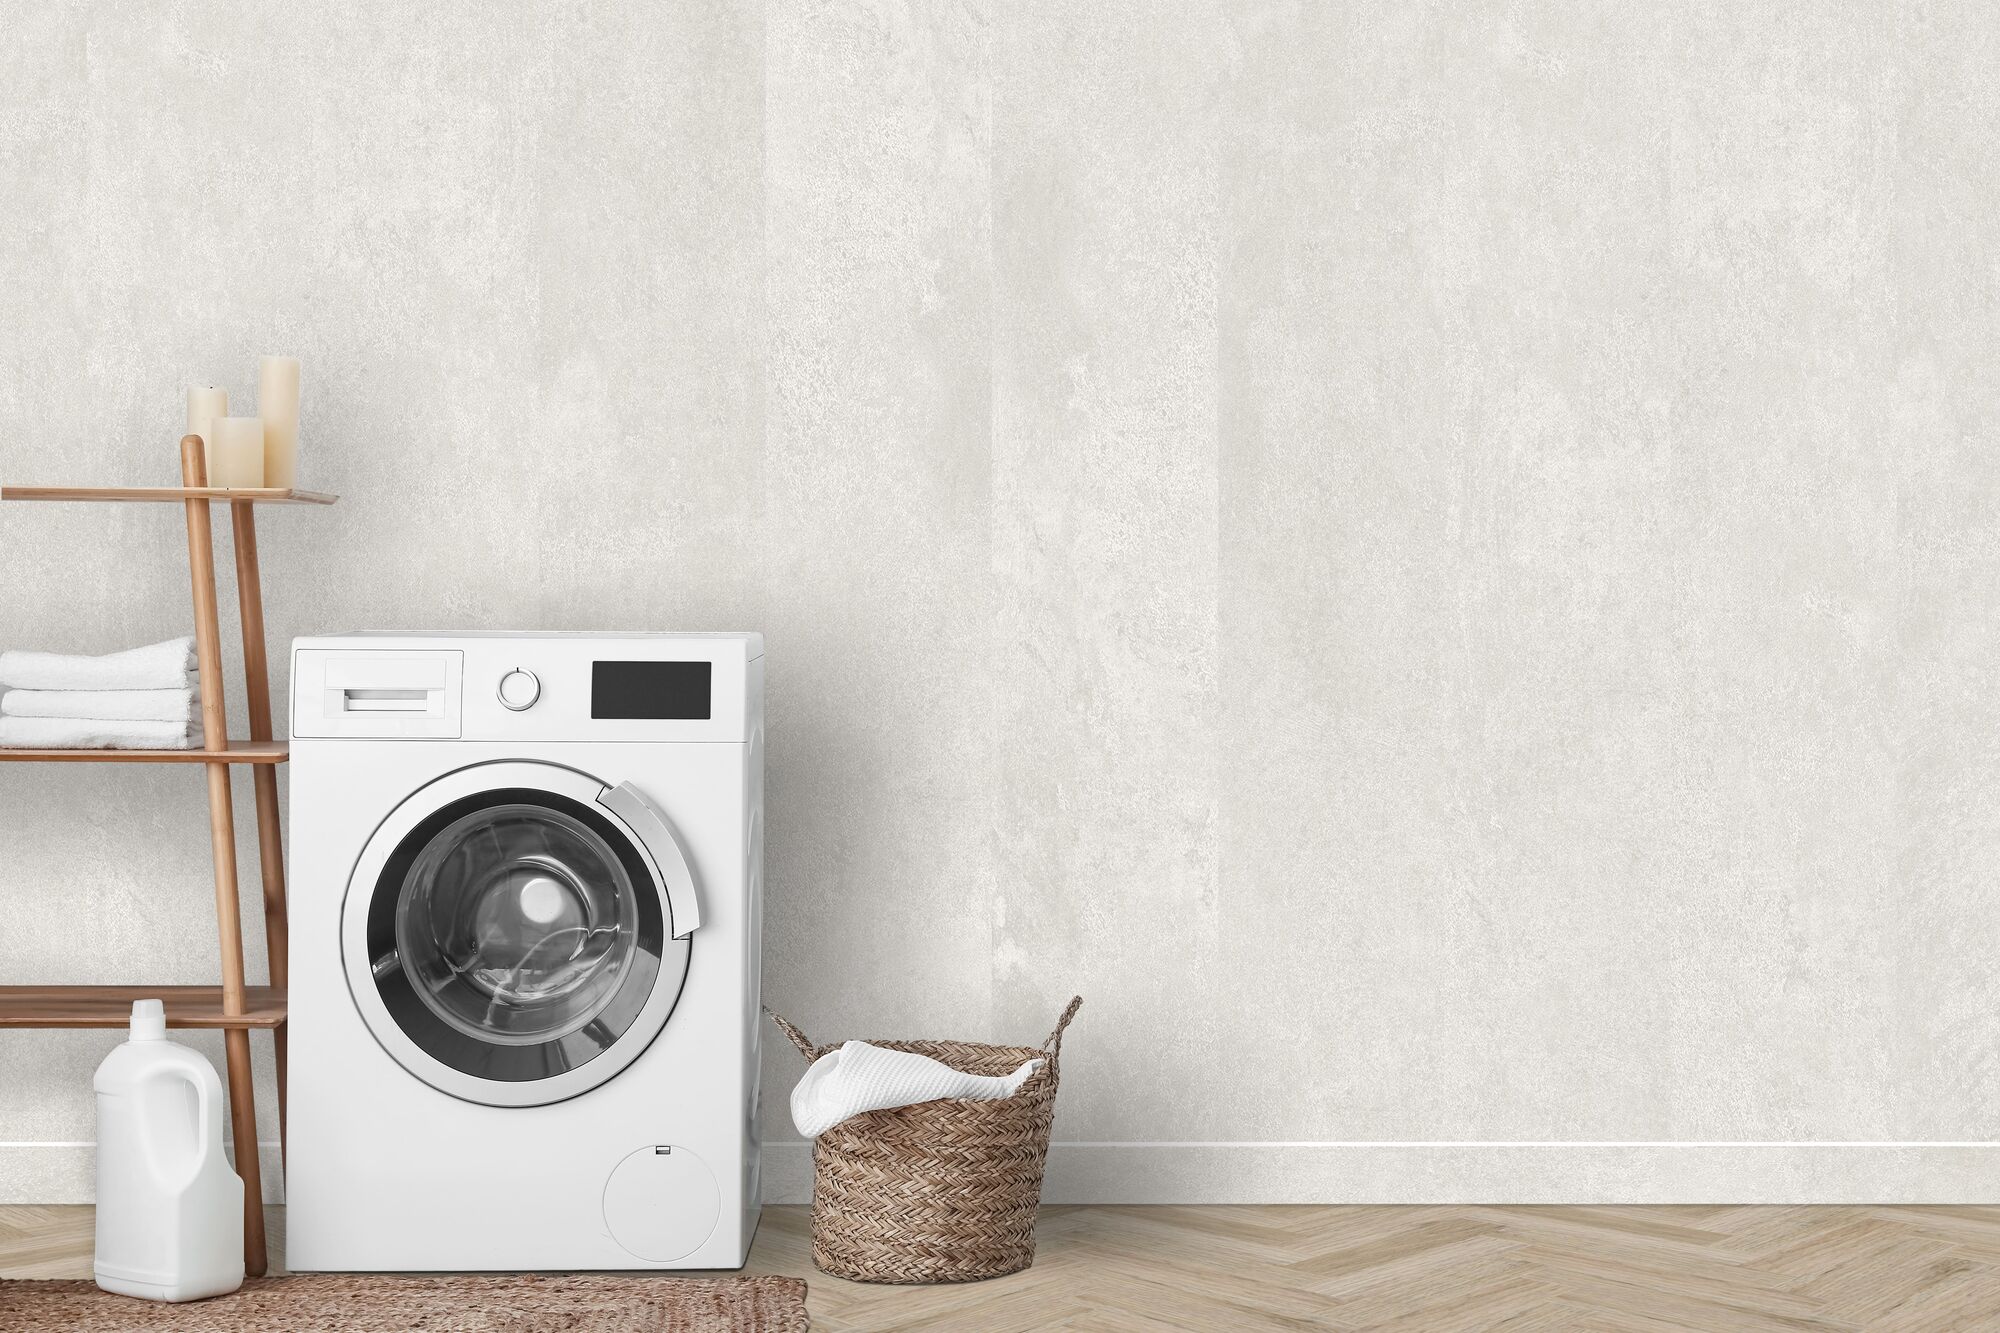 Washing machine standing in front of a beige wall